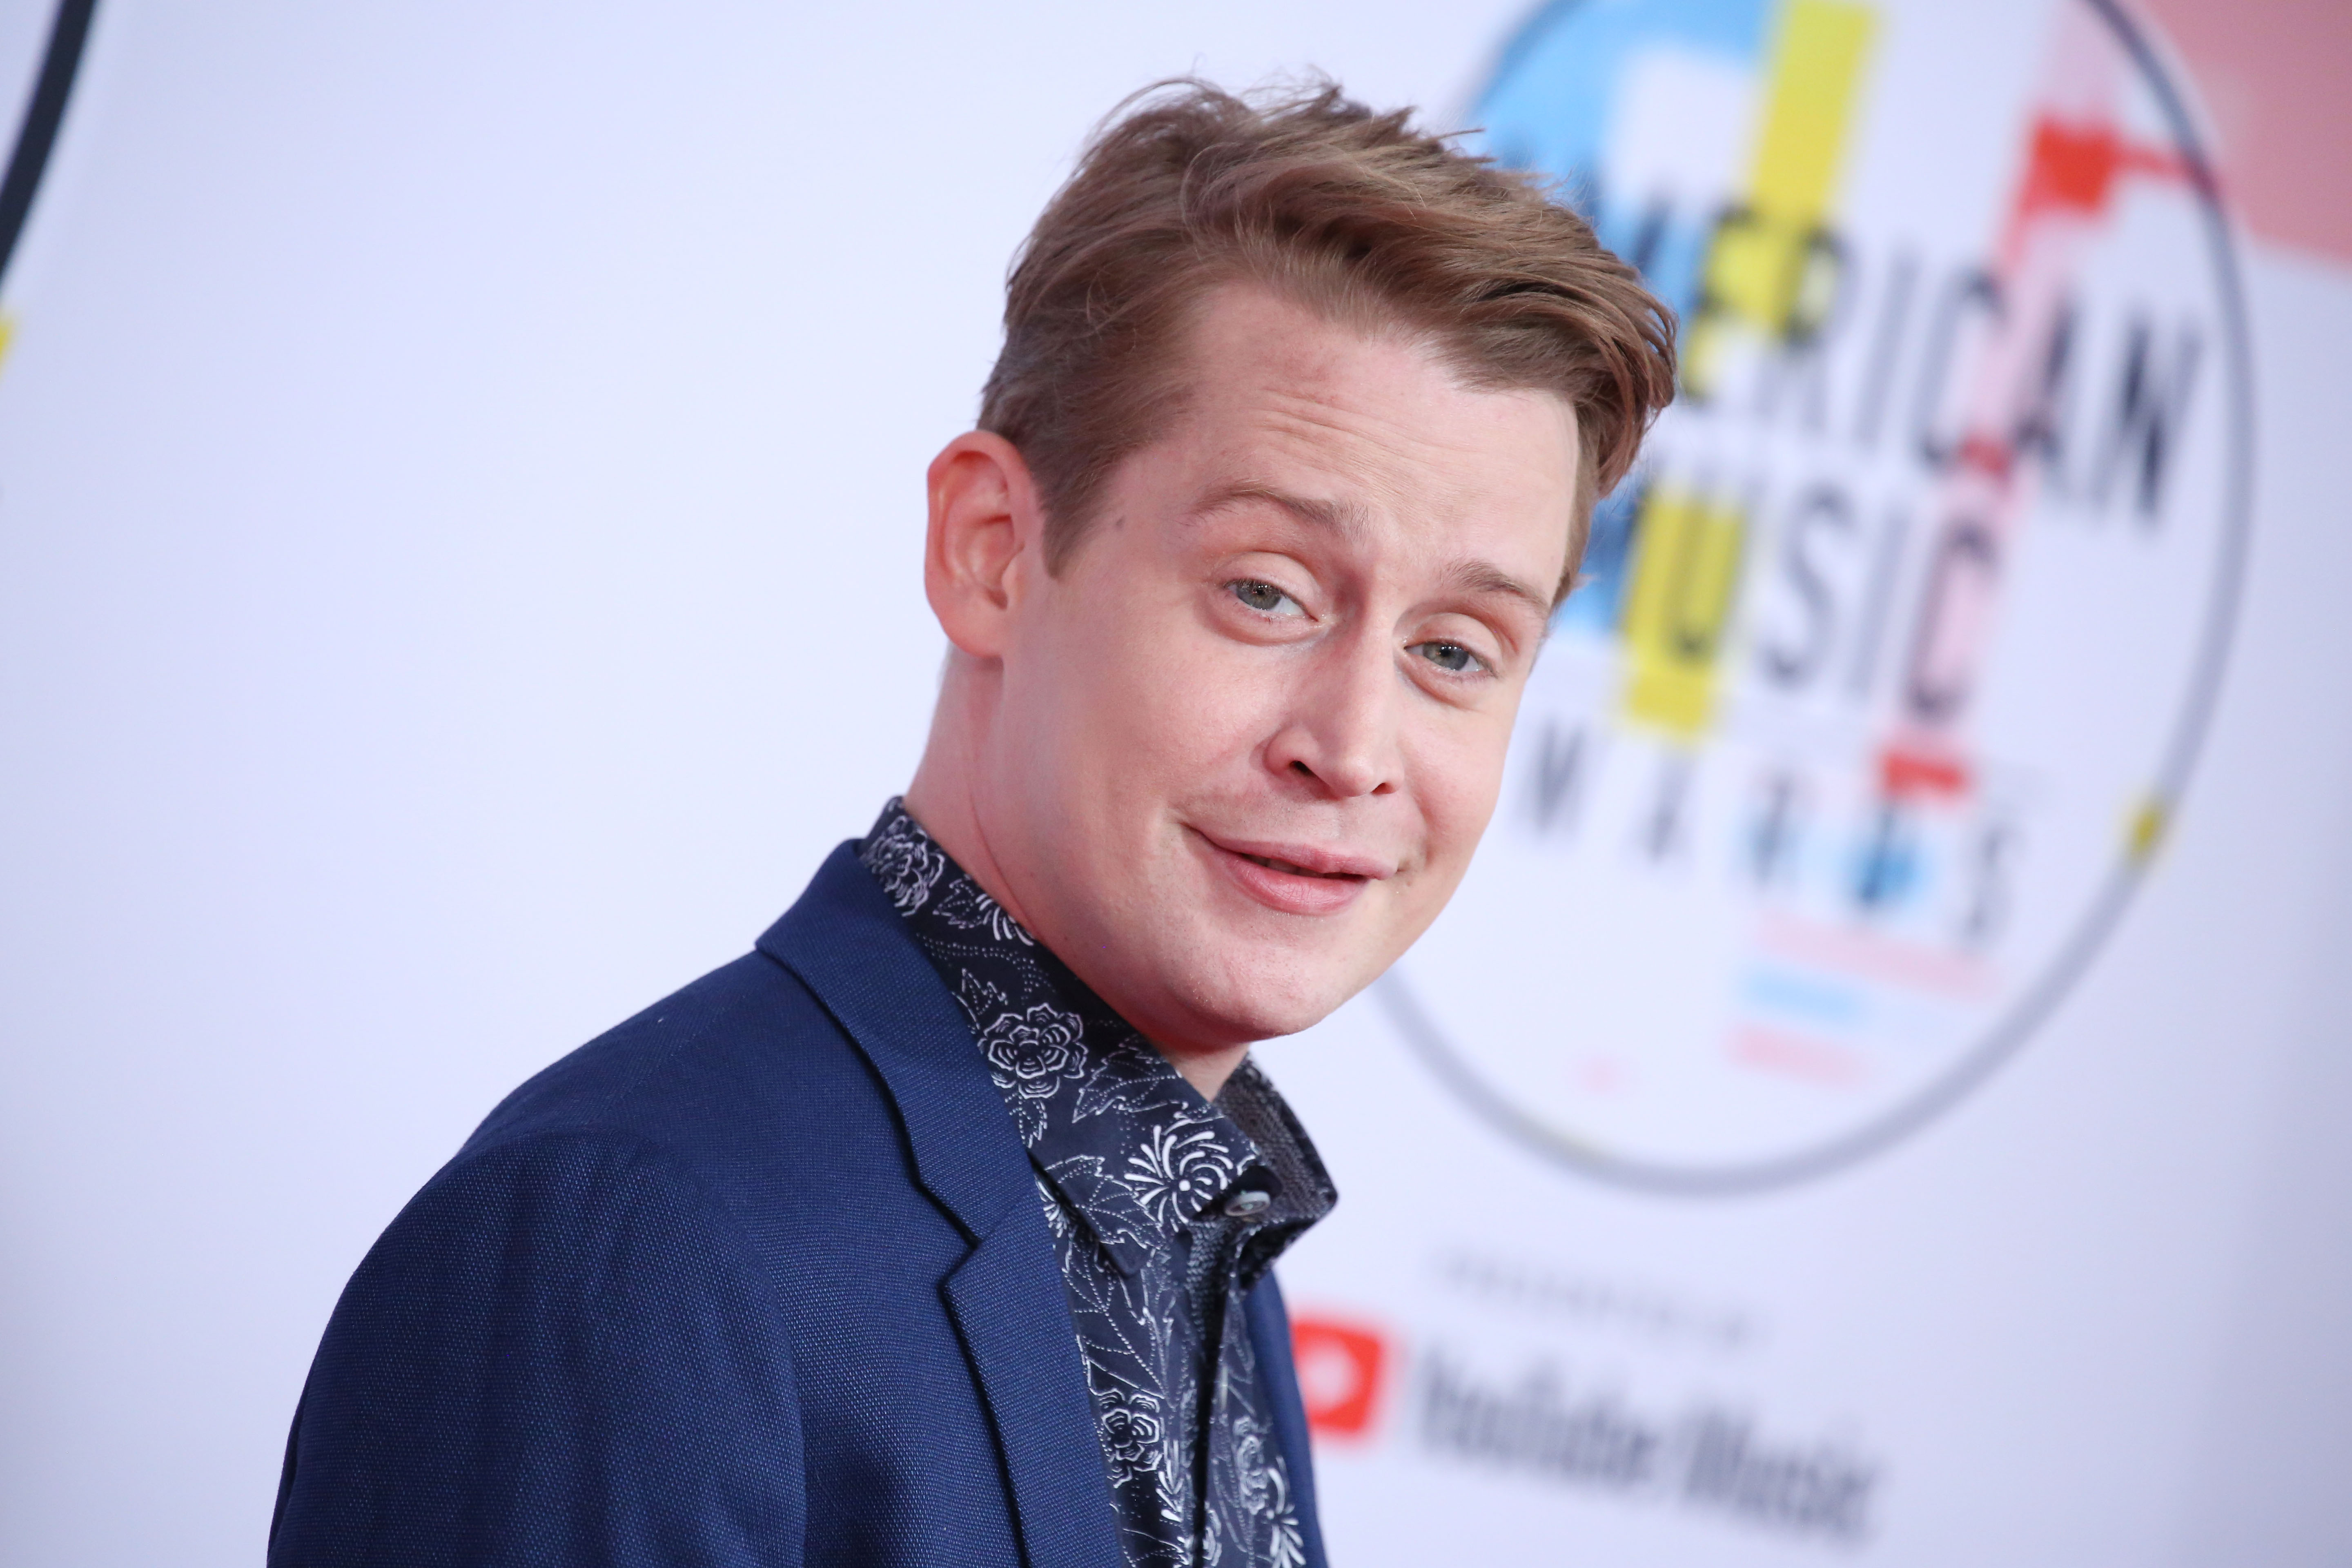 Macaulay Culkin Disastrous Audition for Tarantino’s “Hollywood” IndieWire